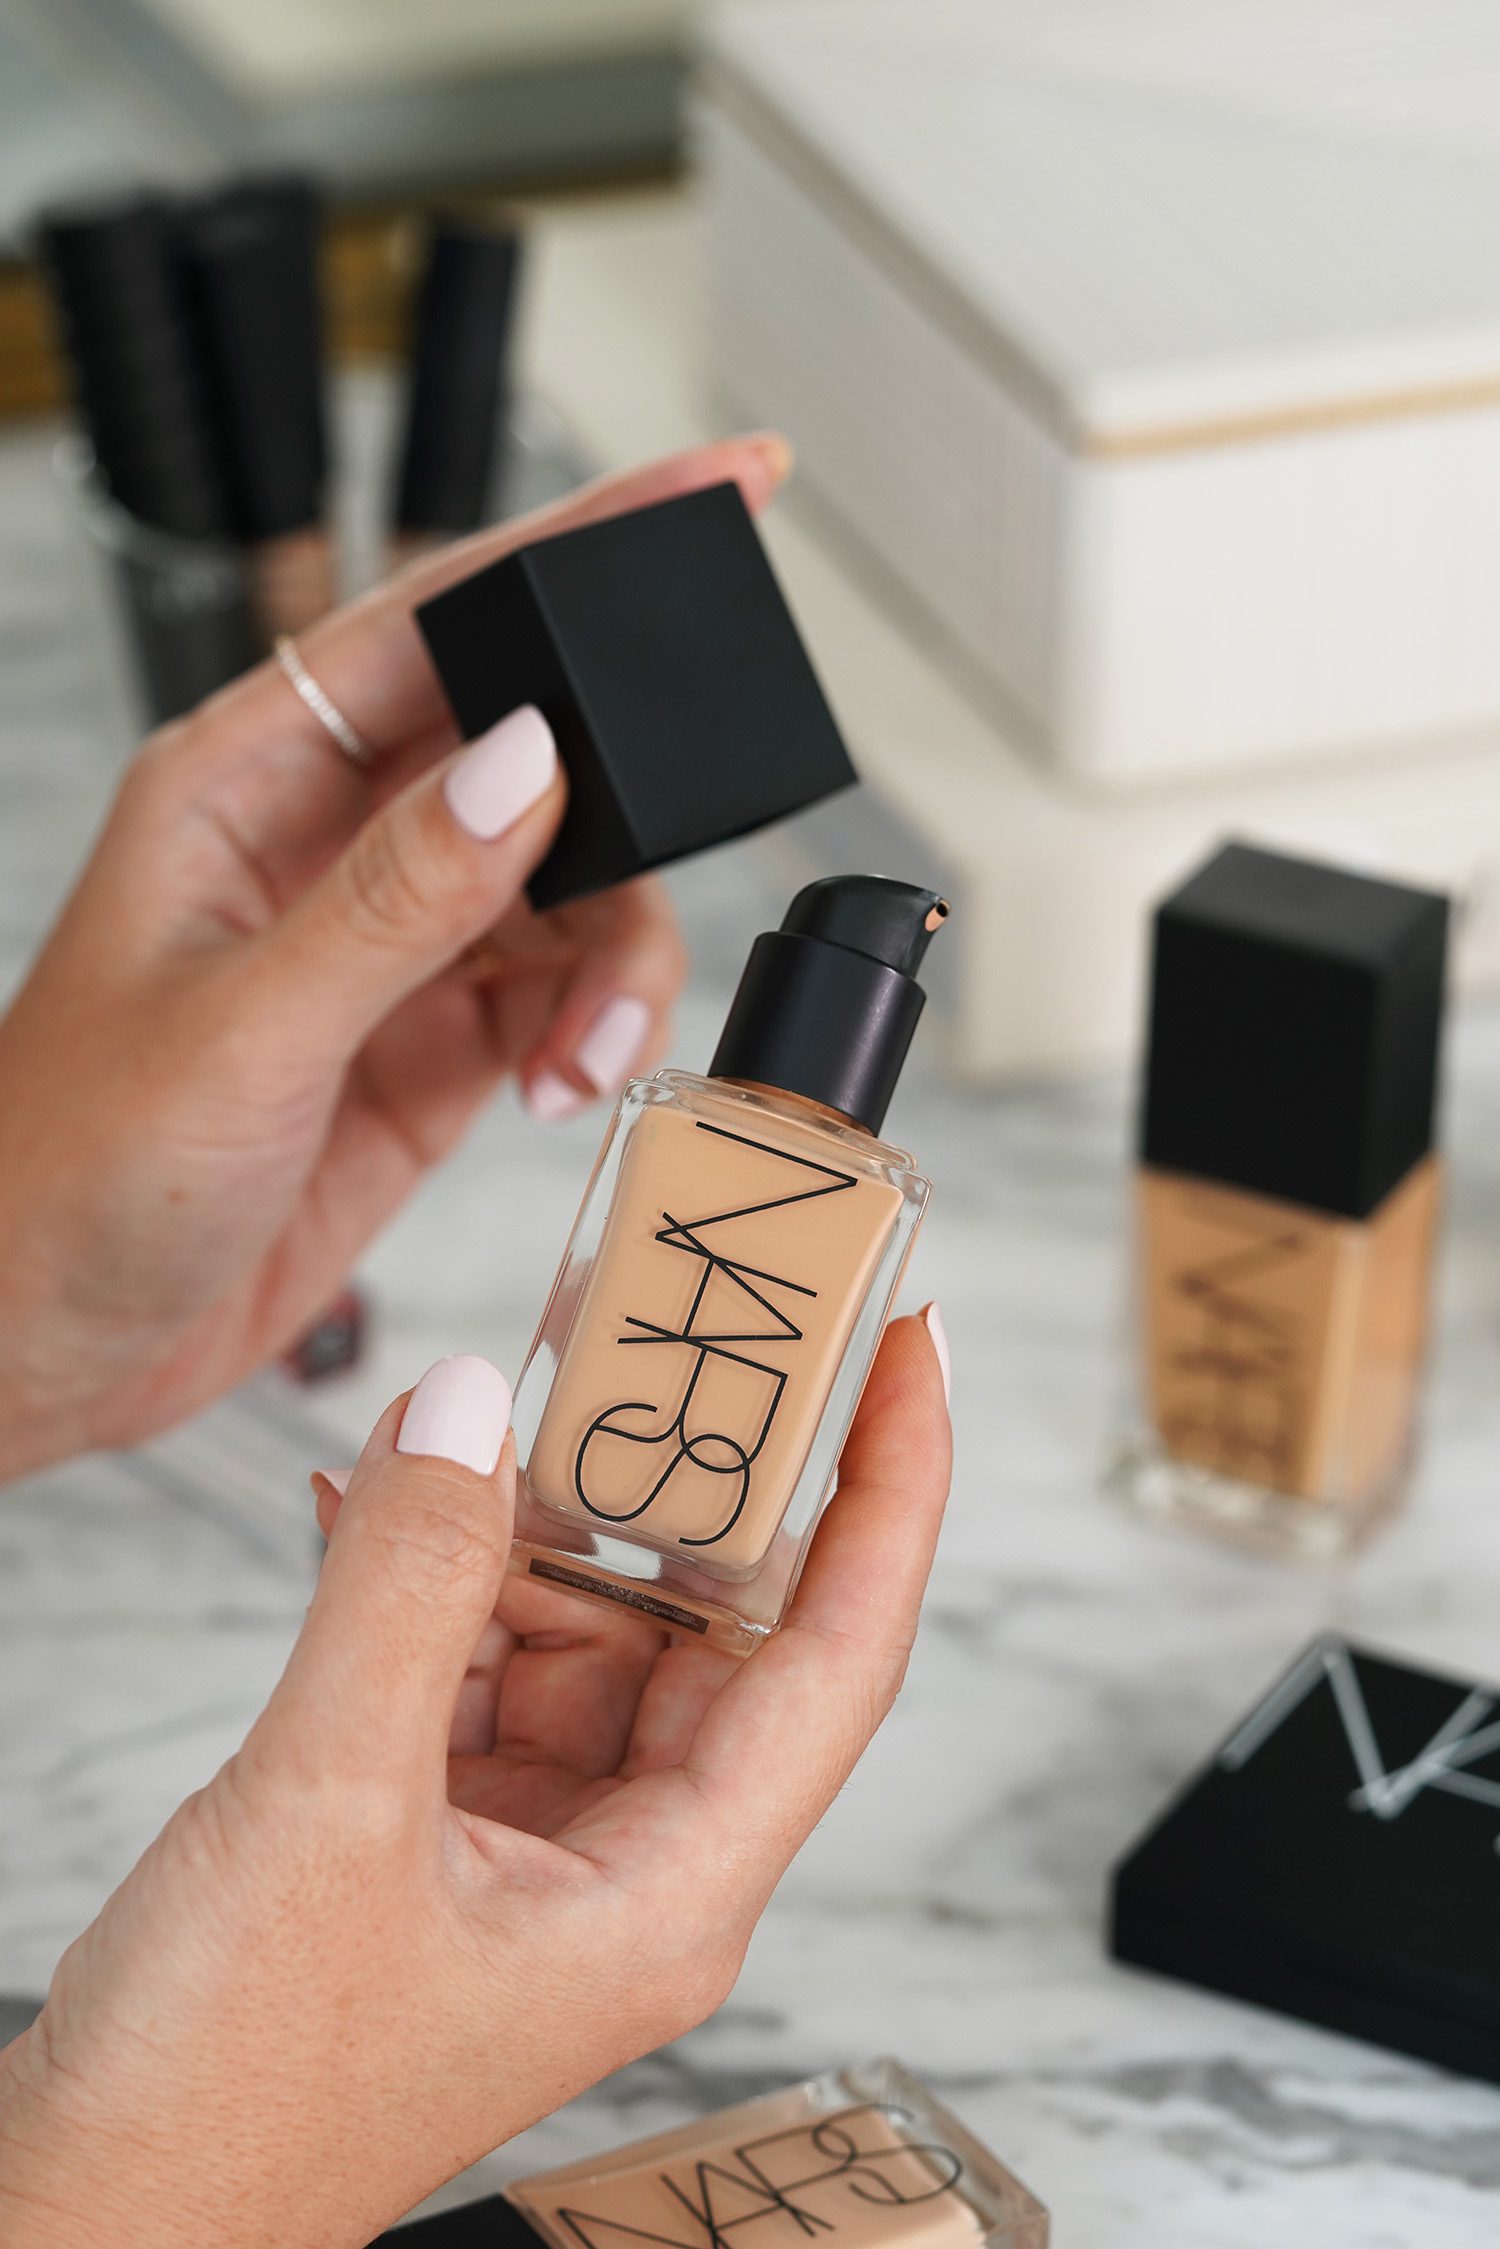 NARS Light Reflecting Foundation Review - The Beauty Look Book